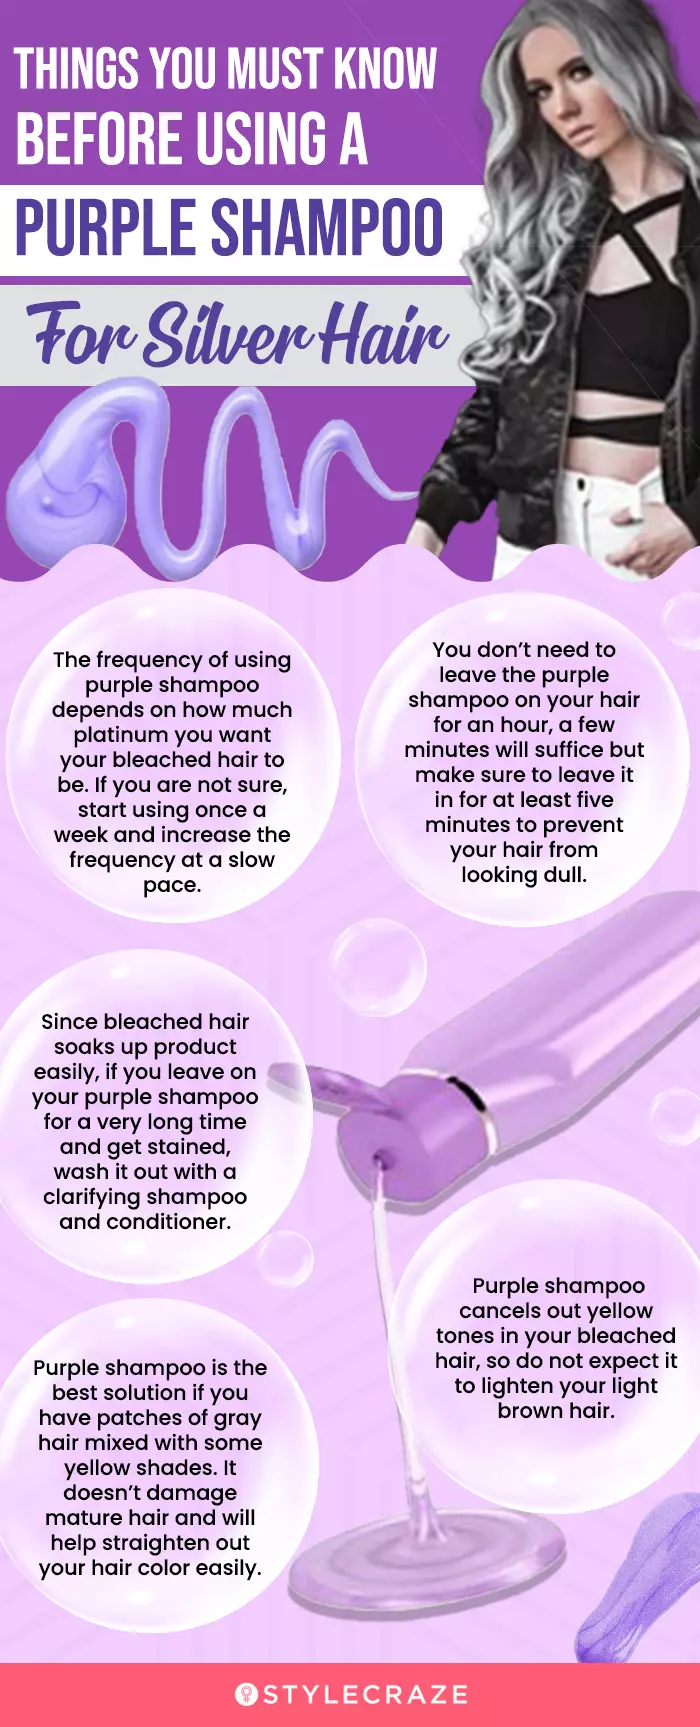 Things You Must Know Before Using A Purple Shampoo For Silver Hair (infographic)